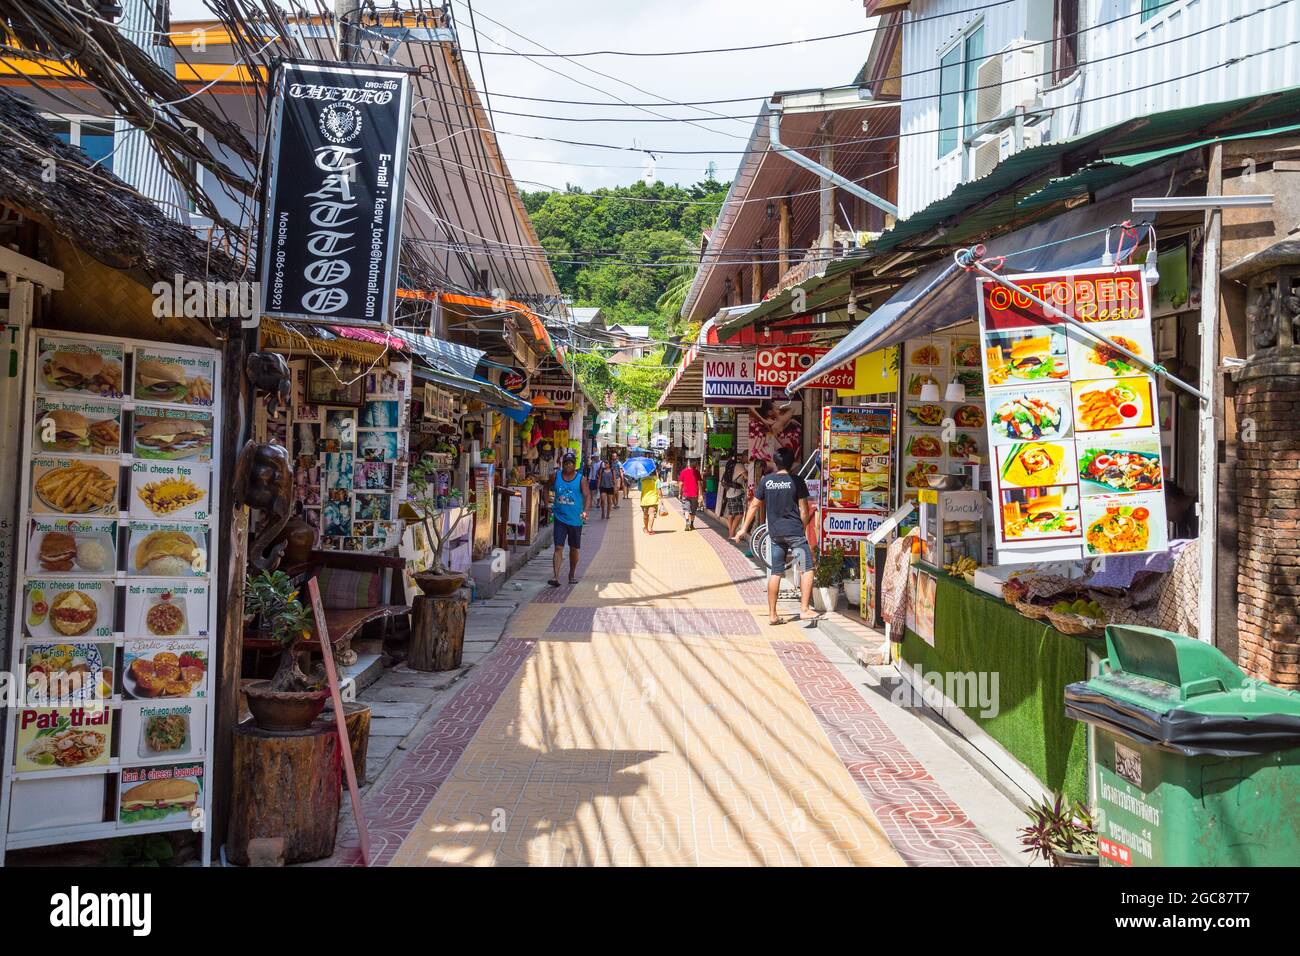 KO PHI PHI, THAILAND, 31ST MARCH 2017: Shops and streets on Ko Phi Phi island. Merchandise and people can be seen. Stock Photo